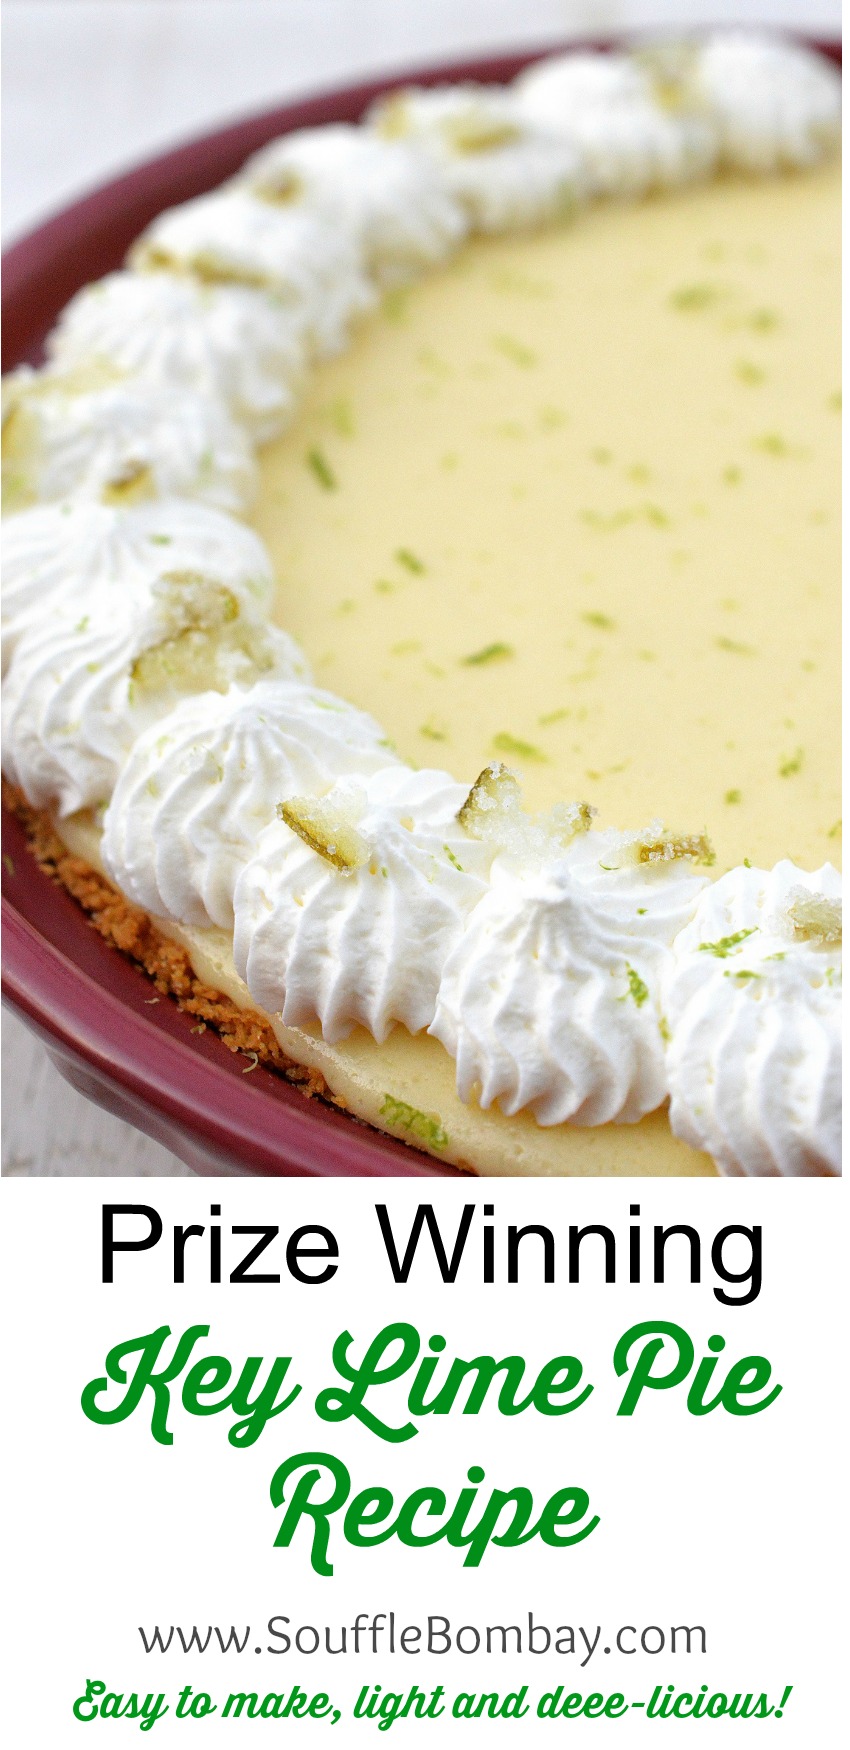 Recipe for Key Lime Pie